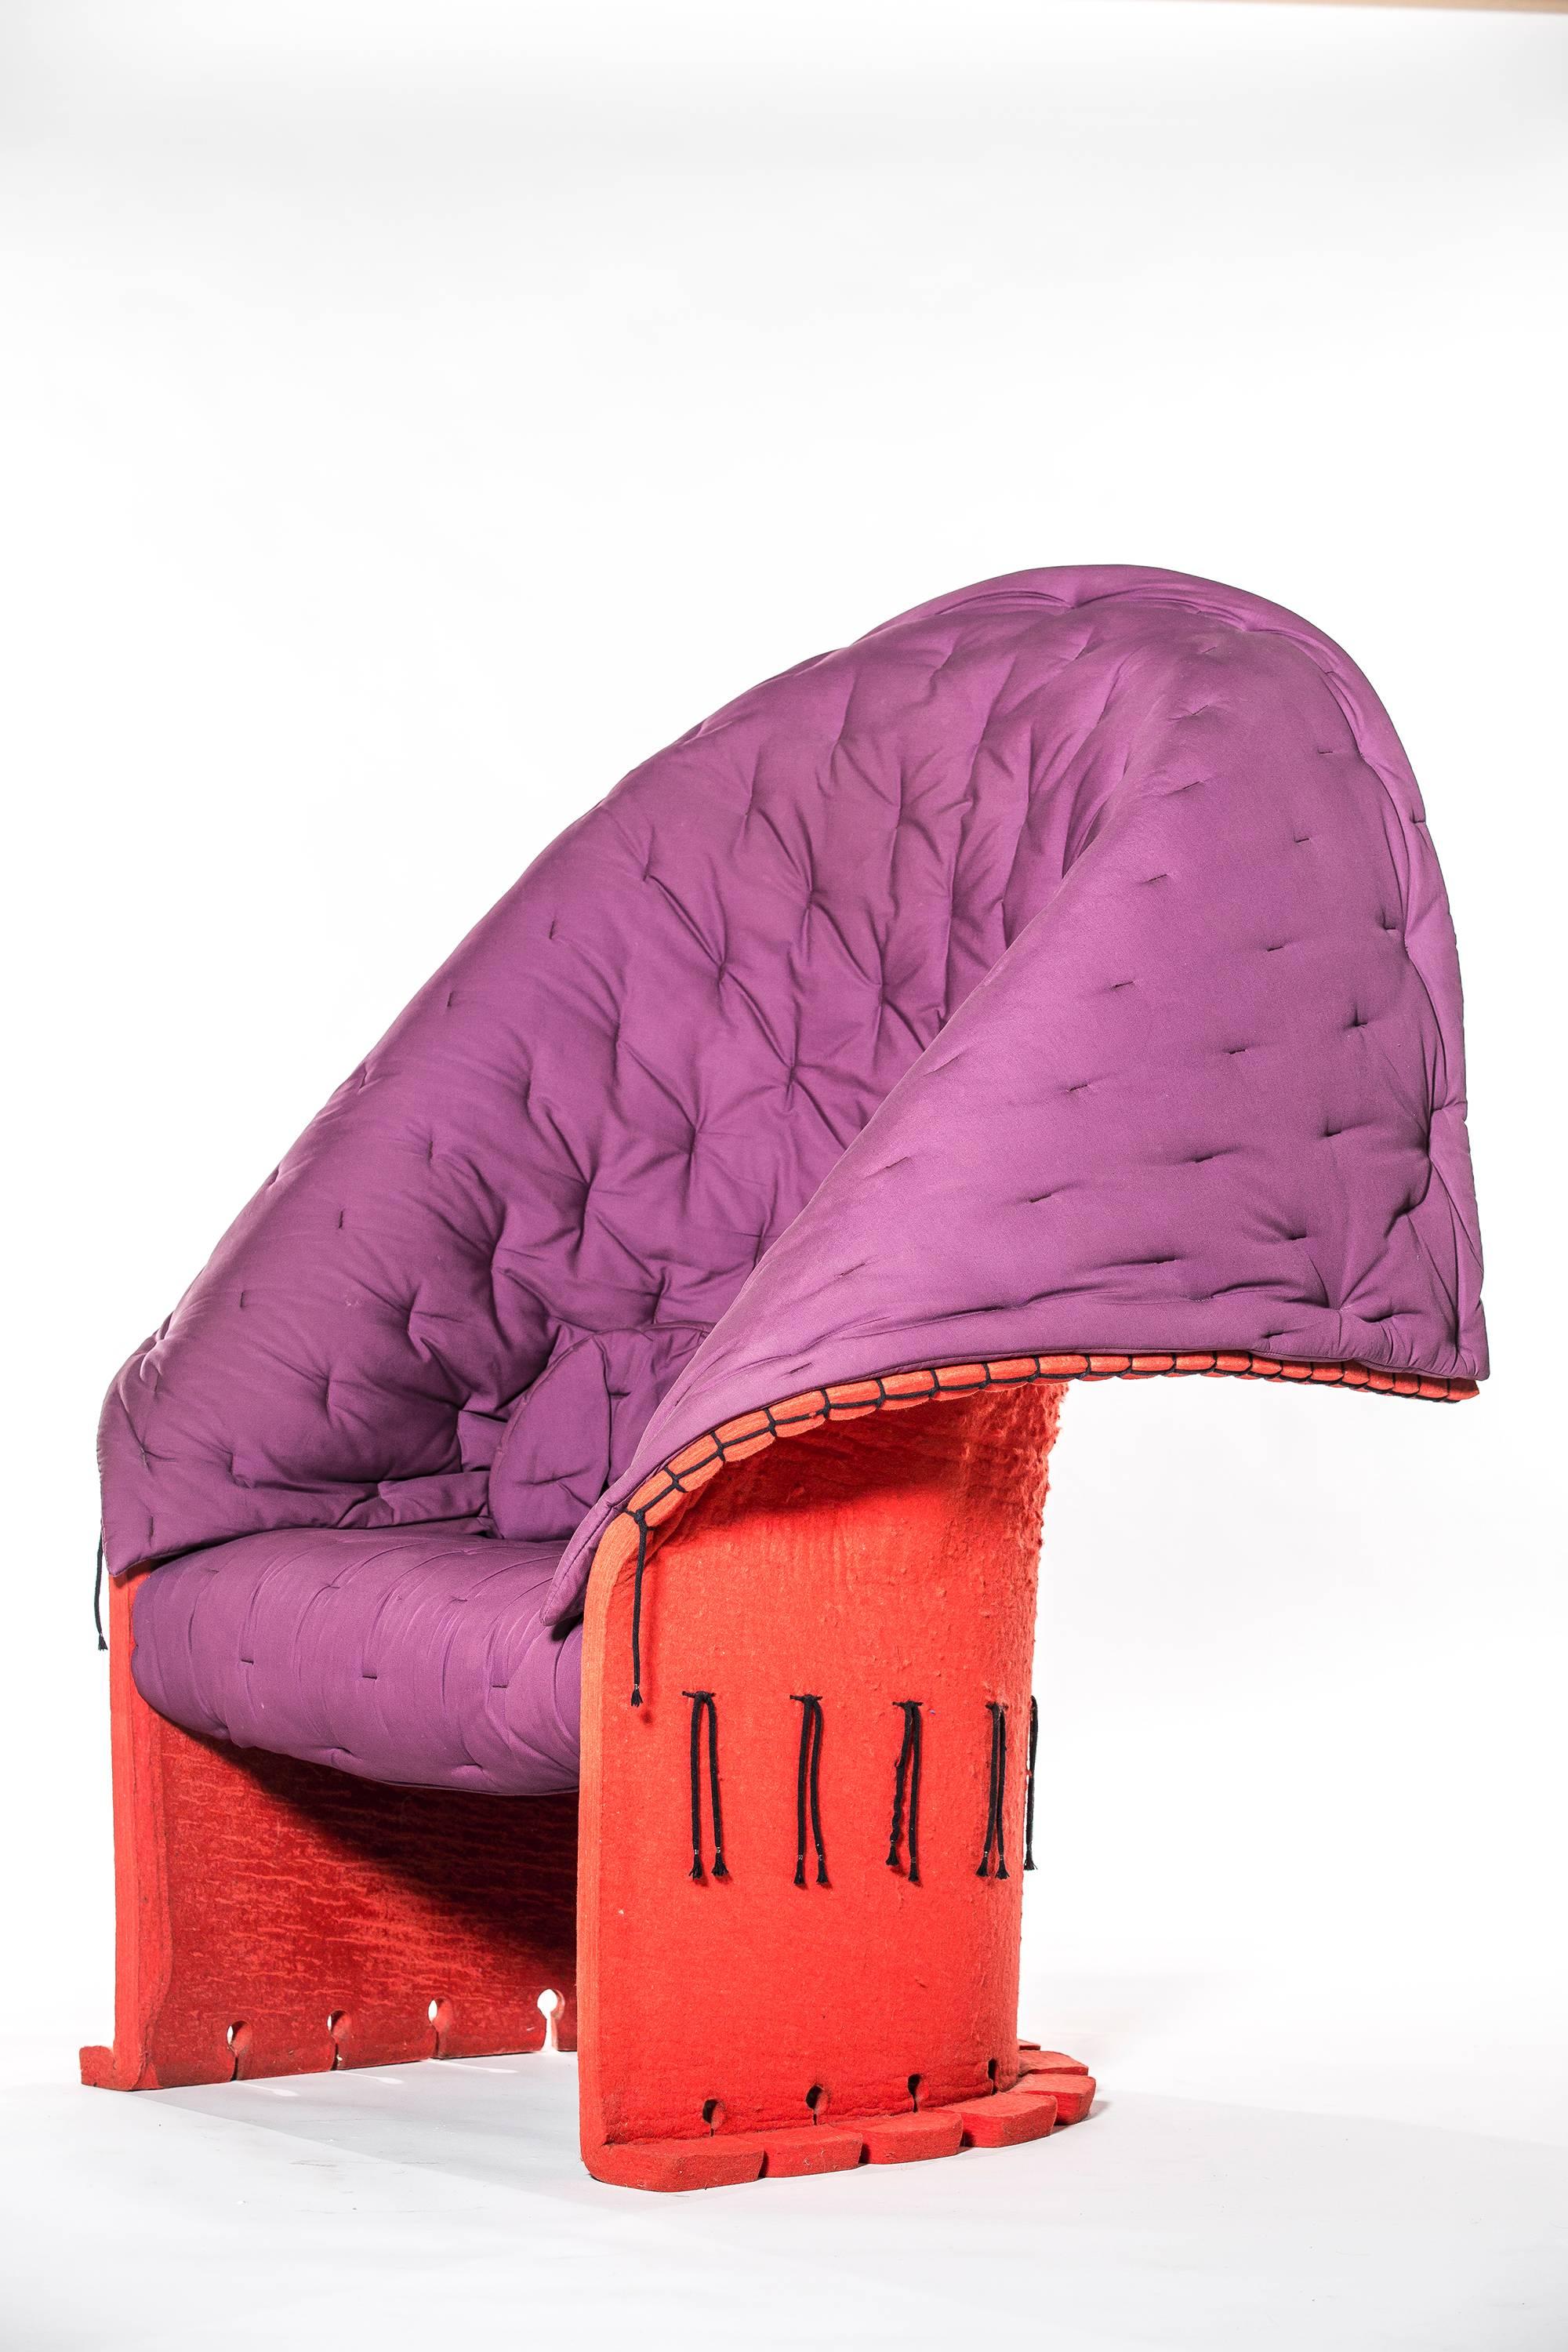 Gaetano Pesce Feltri Chair, 1986 In Good Condition For Sale In Queens, NY